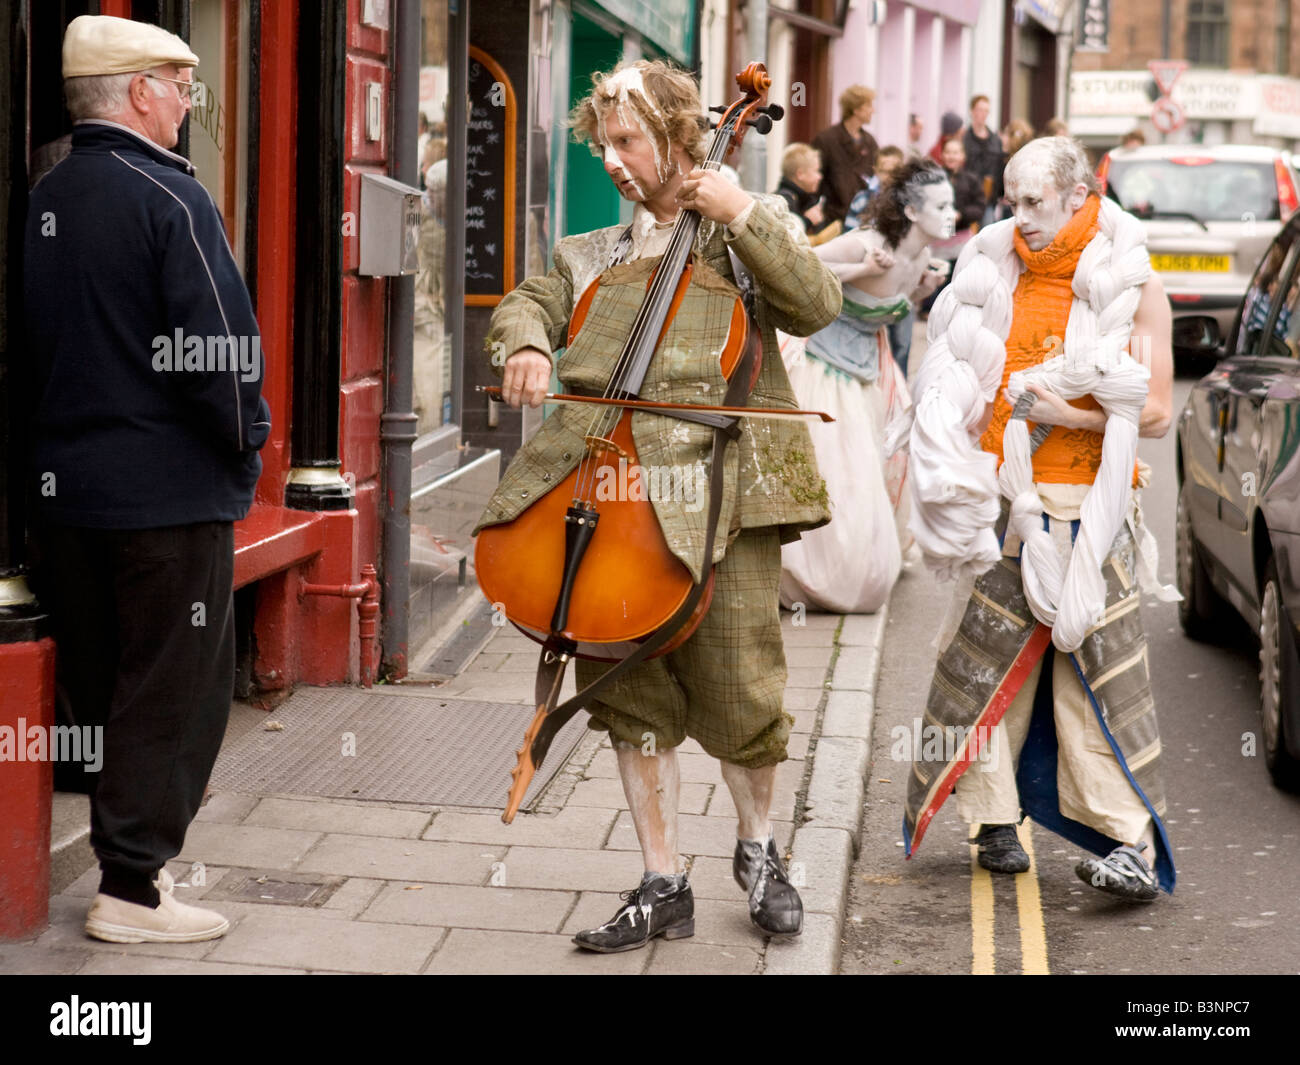 Street theatre strange costume musician playing cello outside pub old man with cap part of Gaelforce Art Festival Dumfries UK Stock Photo